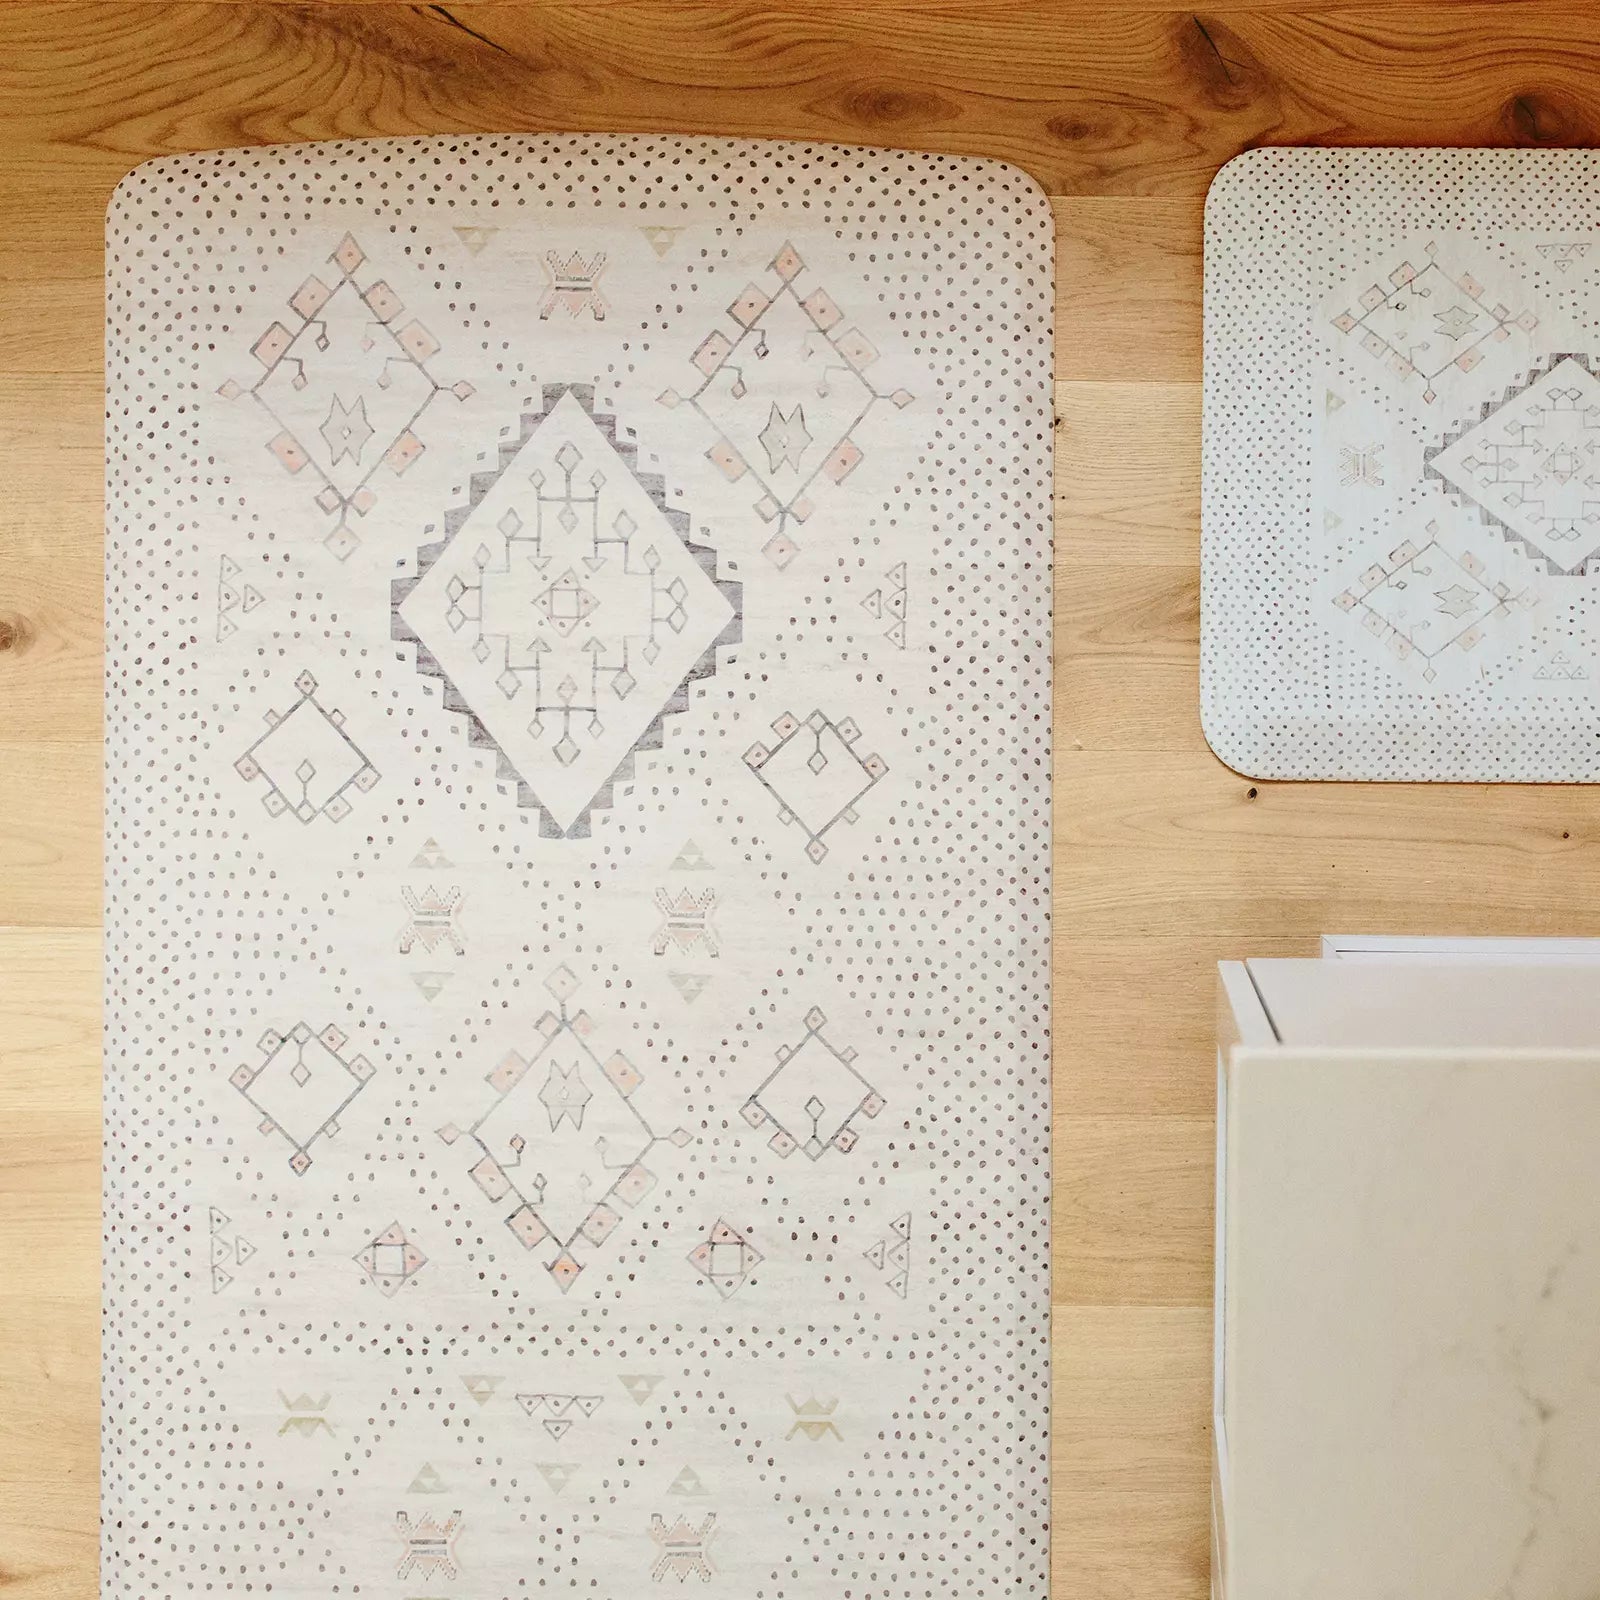 Nama Standing Mat in Ula Oat neutral boho print. Anti-fatigue kitchen mat shown in kitchen from above displaying two sizes of the kitchen mat.